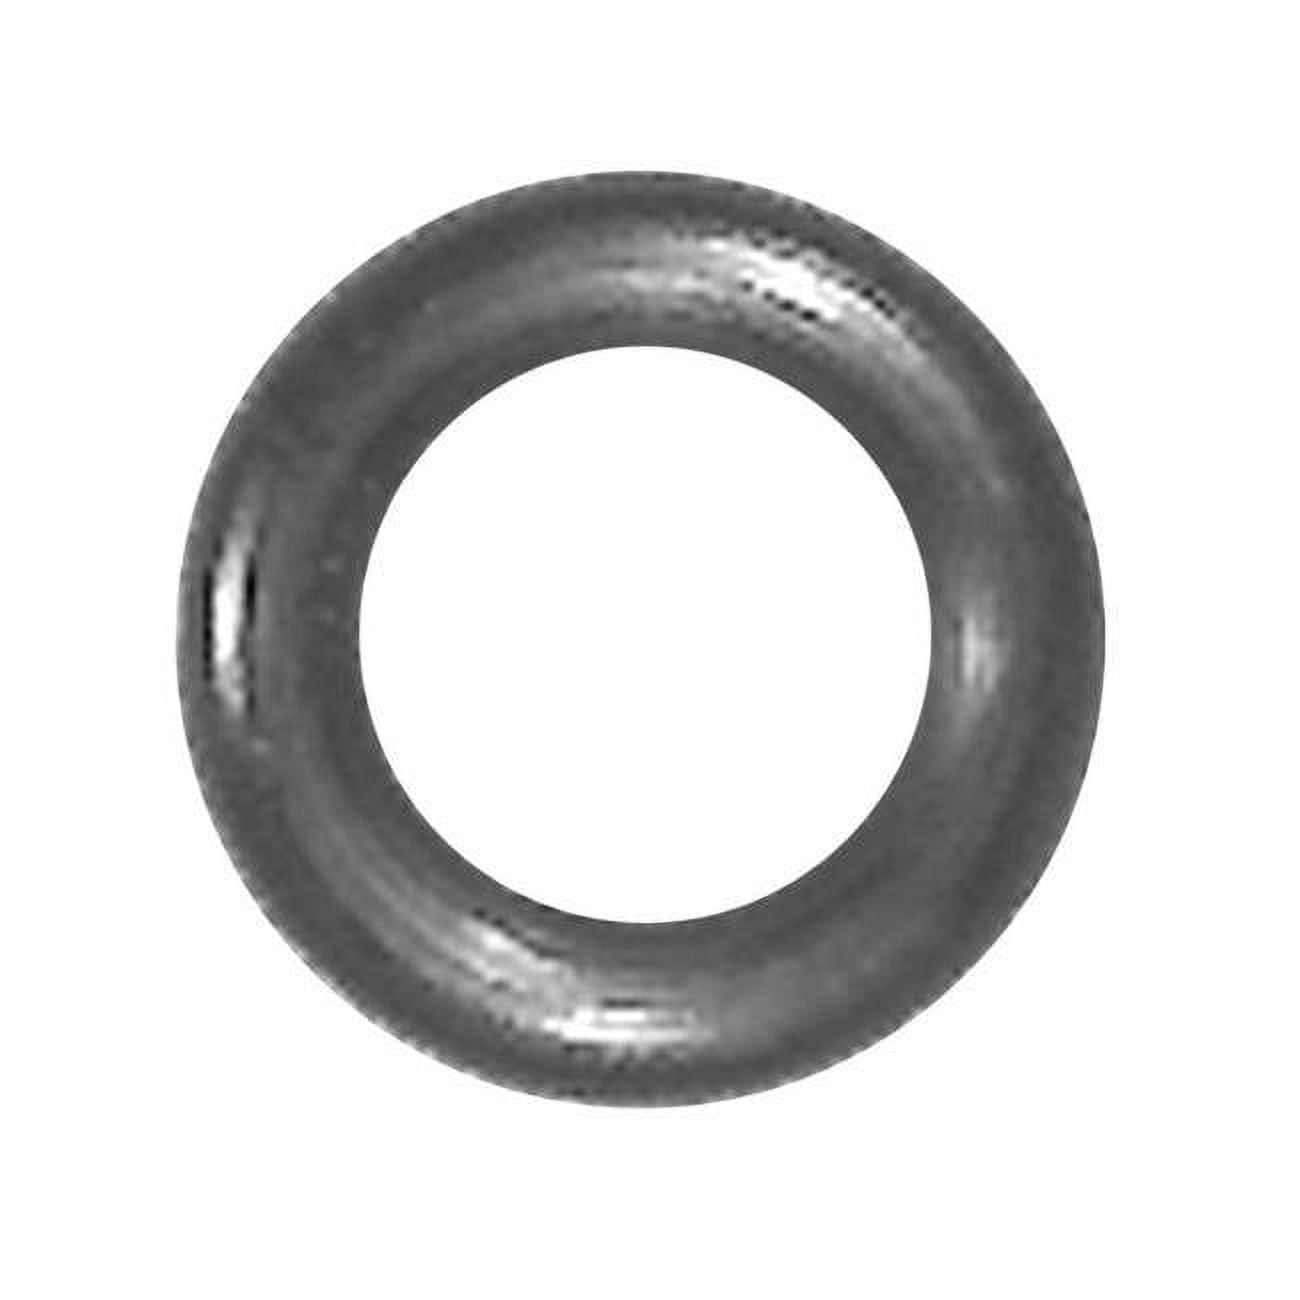 35750b 0.31 X 0.18 X 0.06 In. O-ring Faucet- Pack Of 5